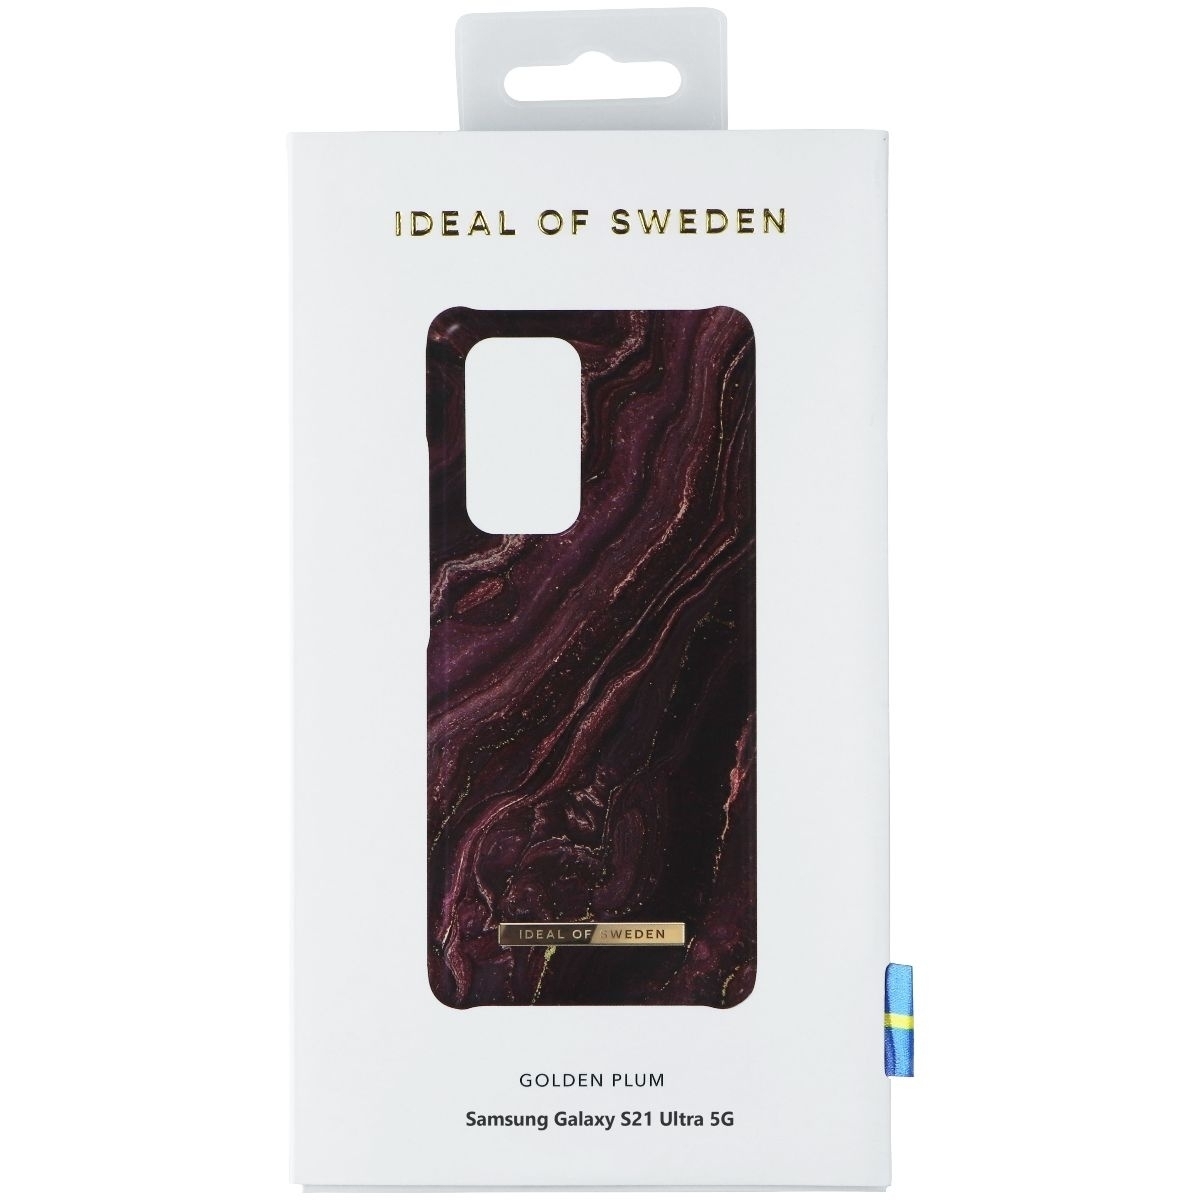 IDeal Of Sweden Printed Case For Samsung Galaxy S21 Ultra 5G - Golden Plum